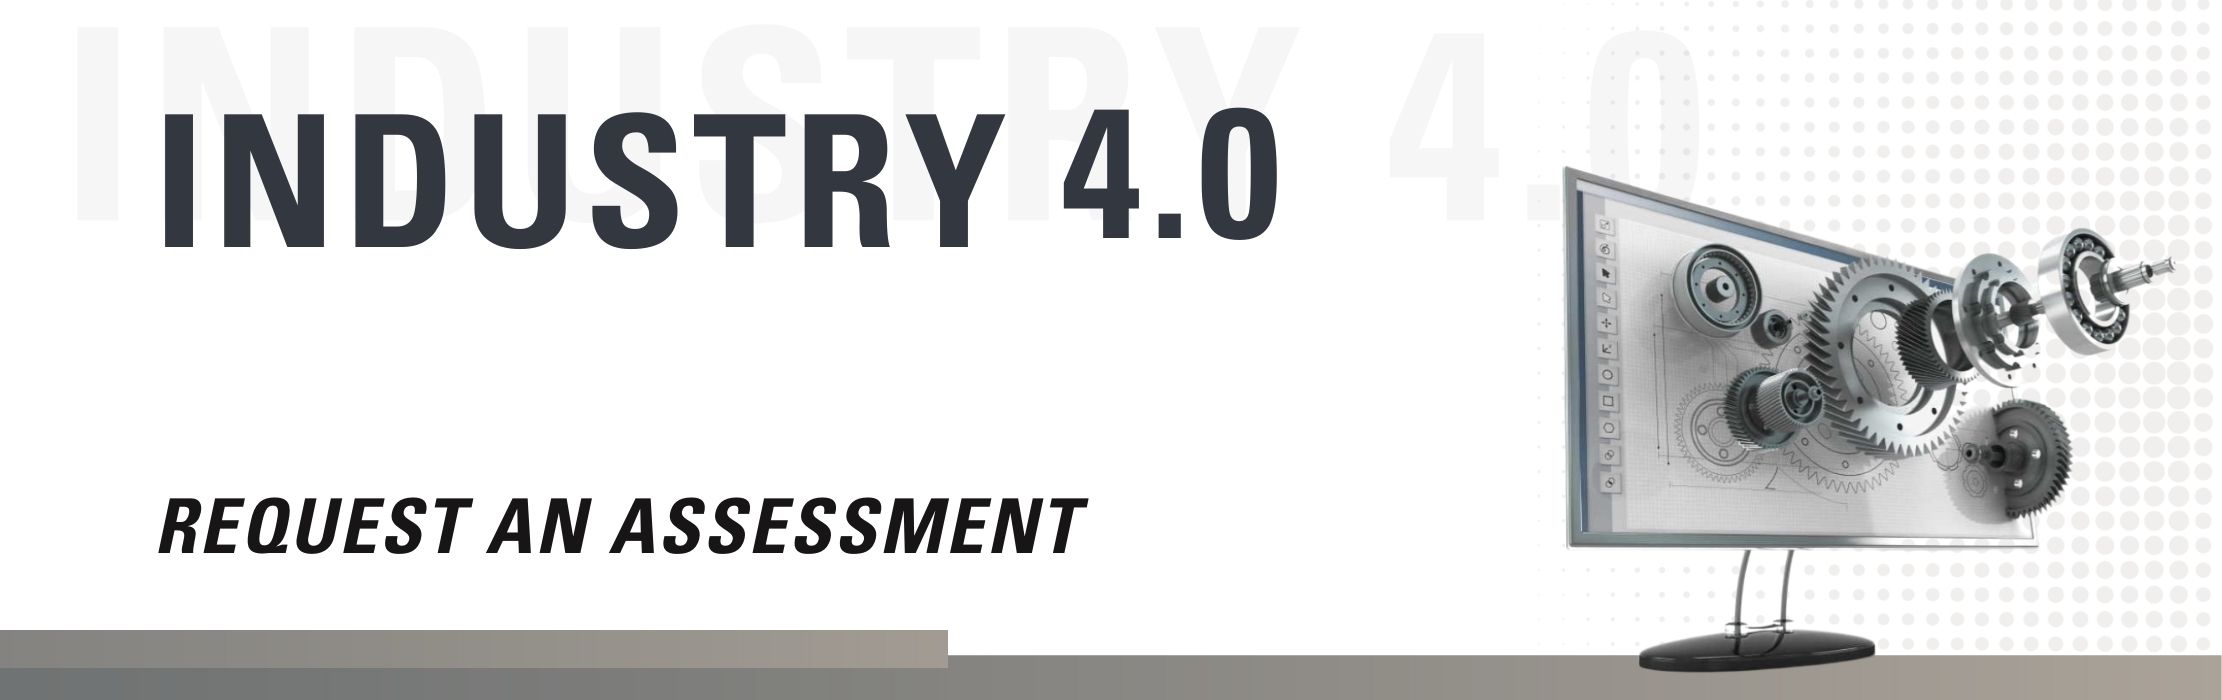 Industry 4.0: Request an Assessment.